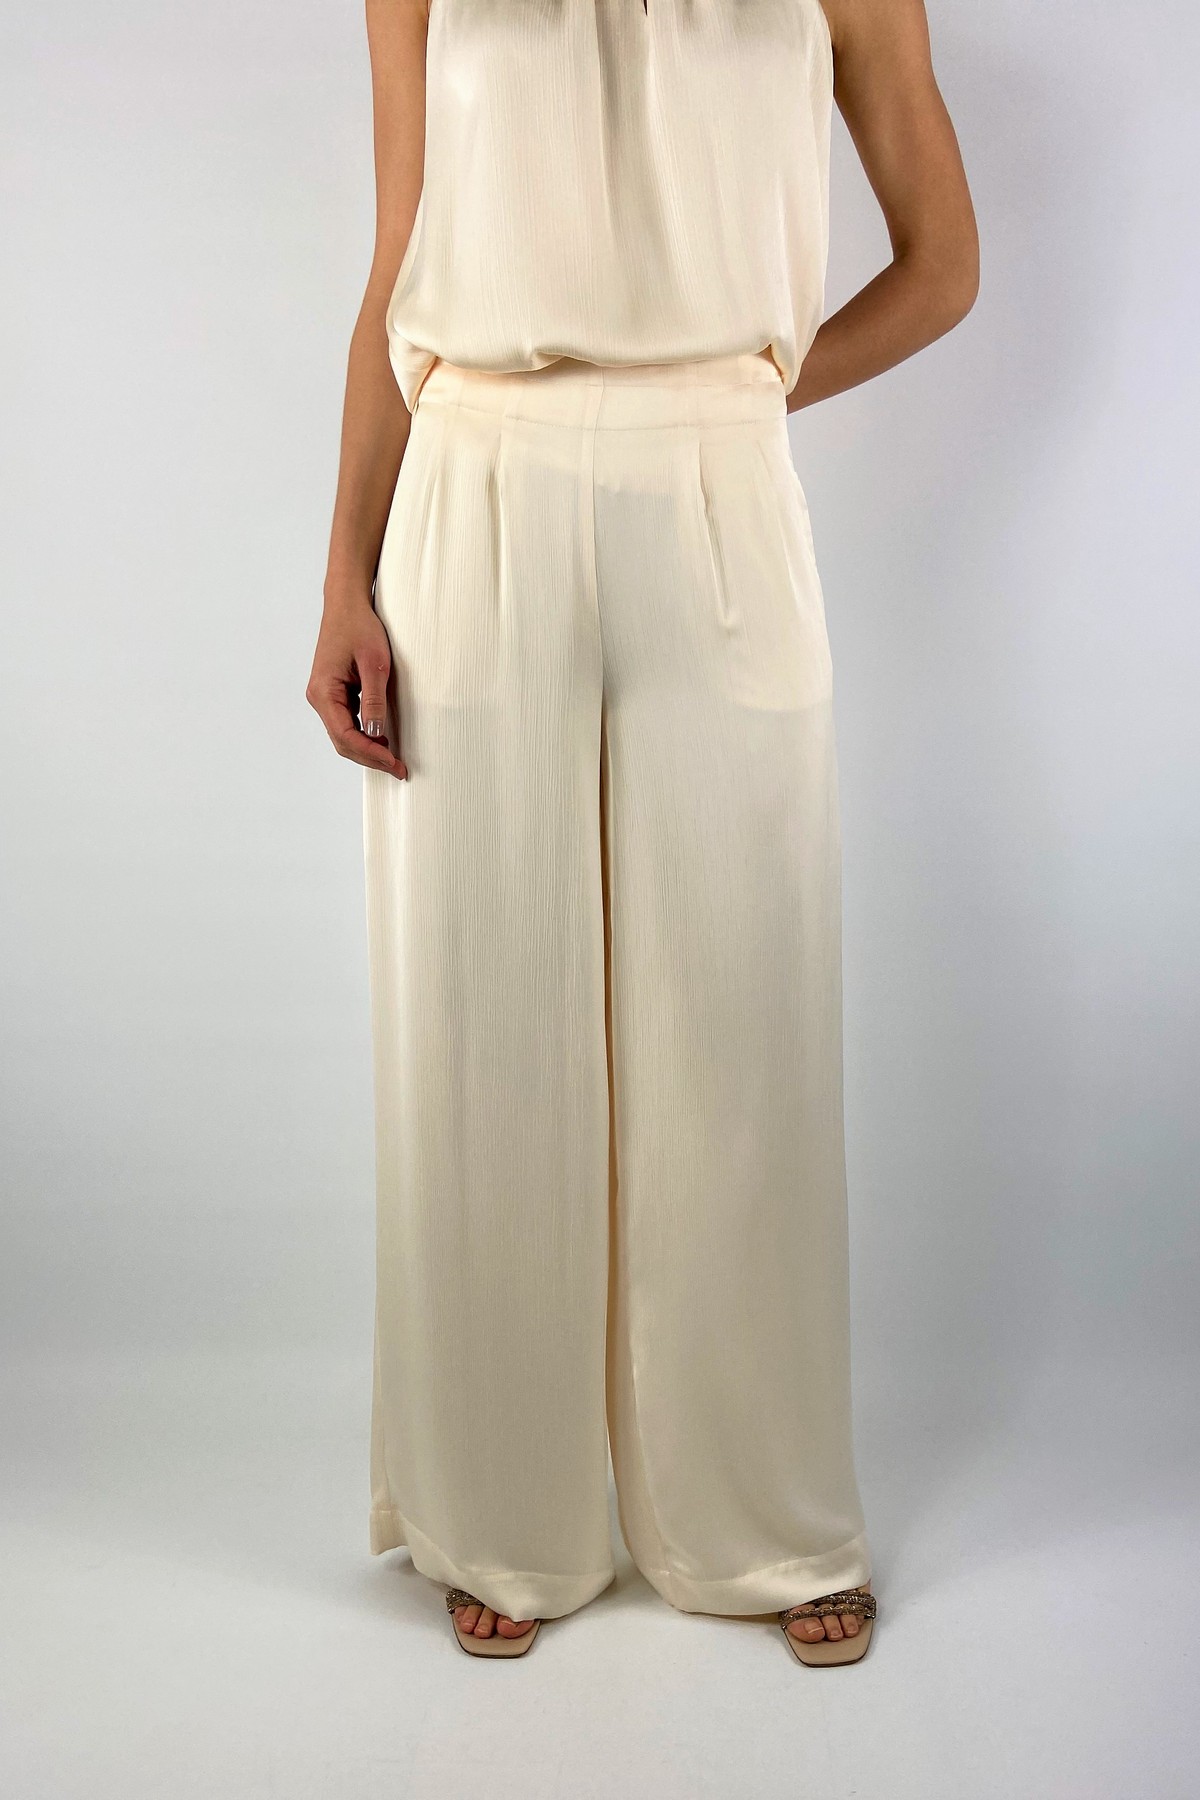 Oscar the collection - Constance Trousers - Broek satin crepe pearl